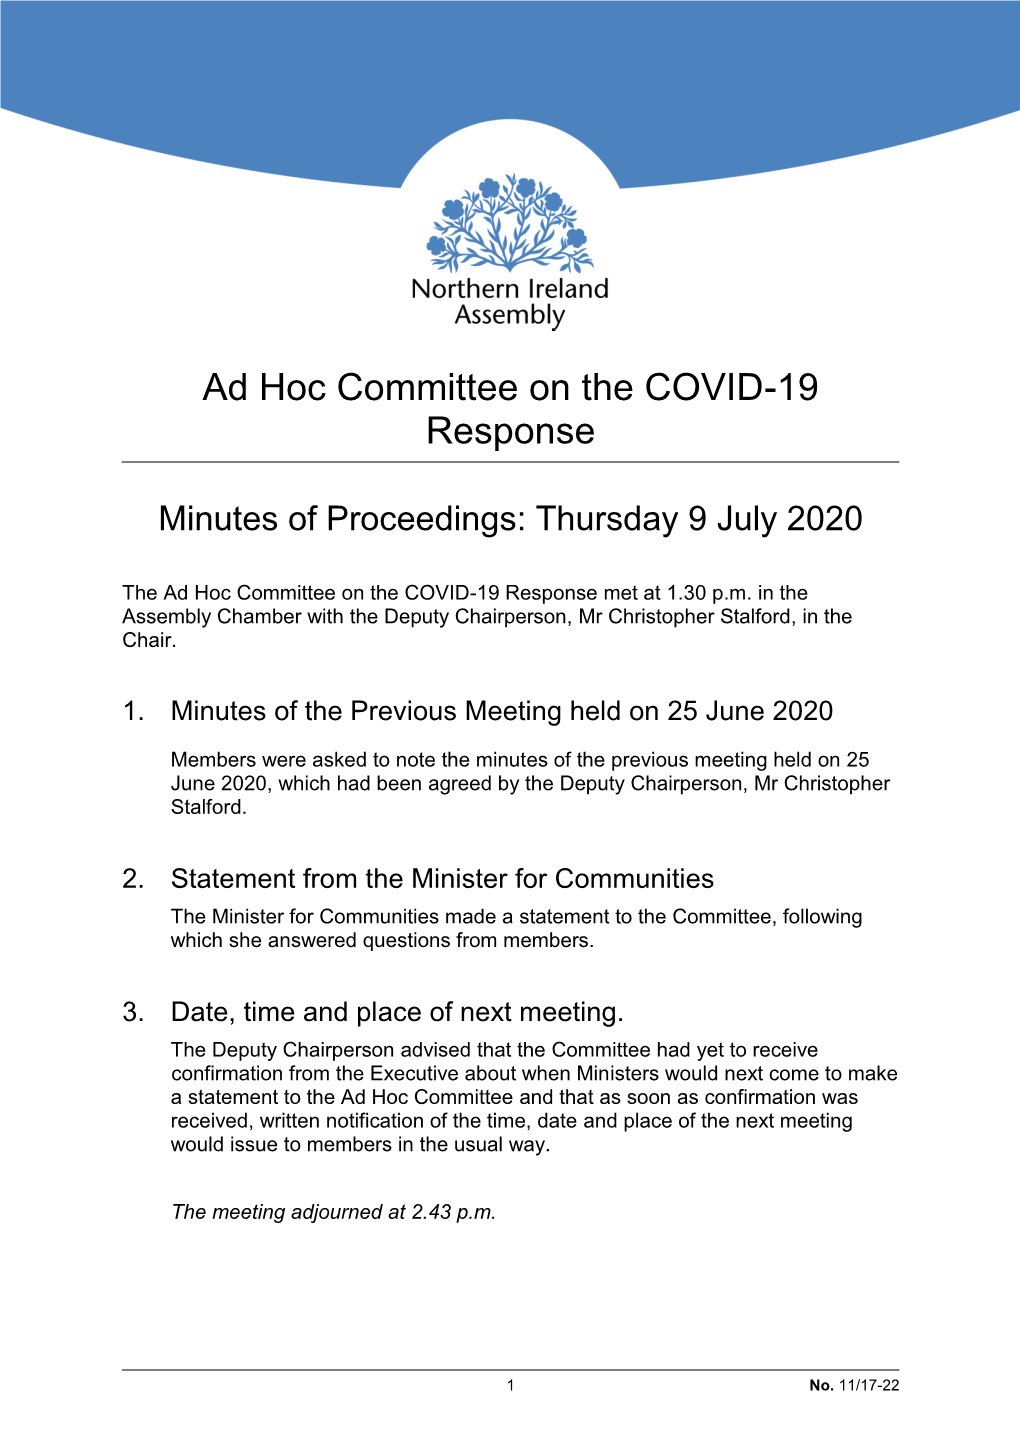 Ad Hoc Committee on the COVID-19 Response